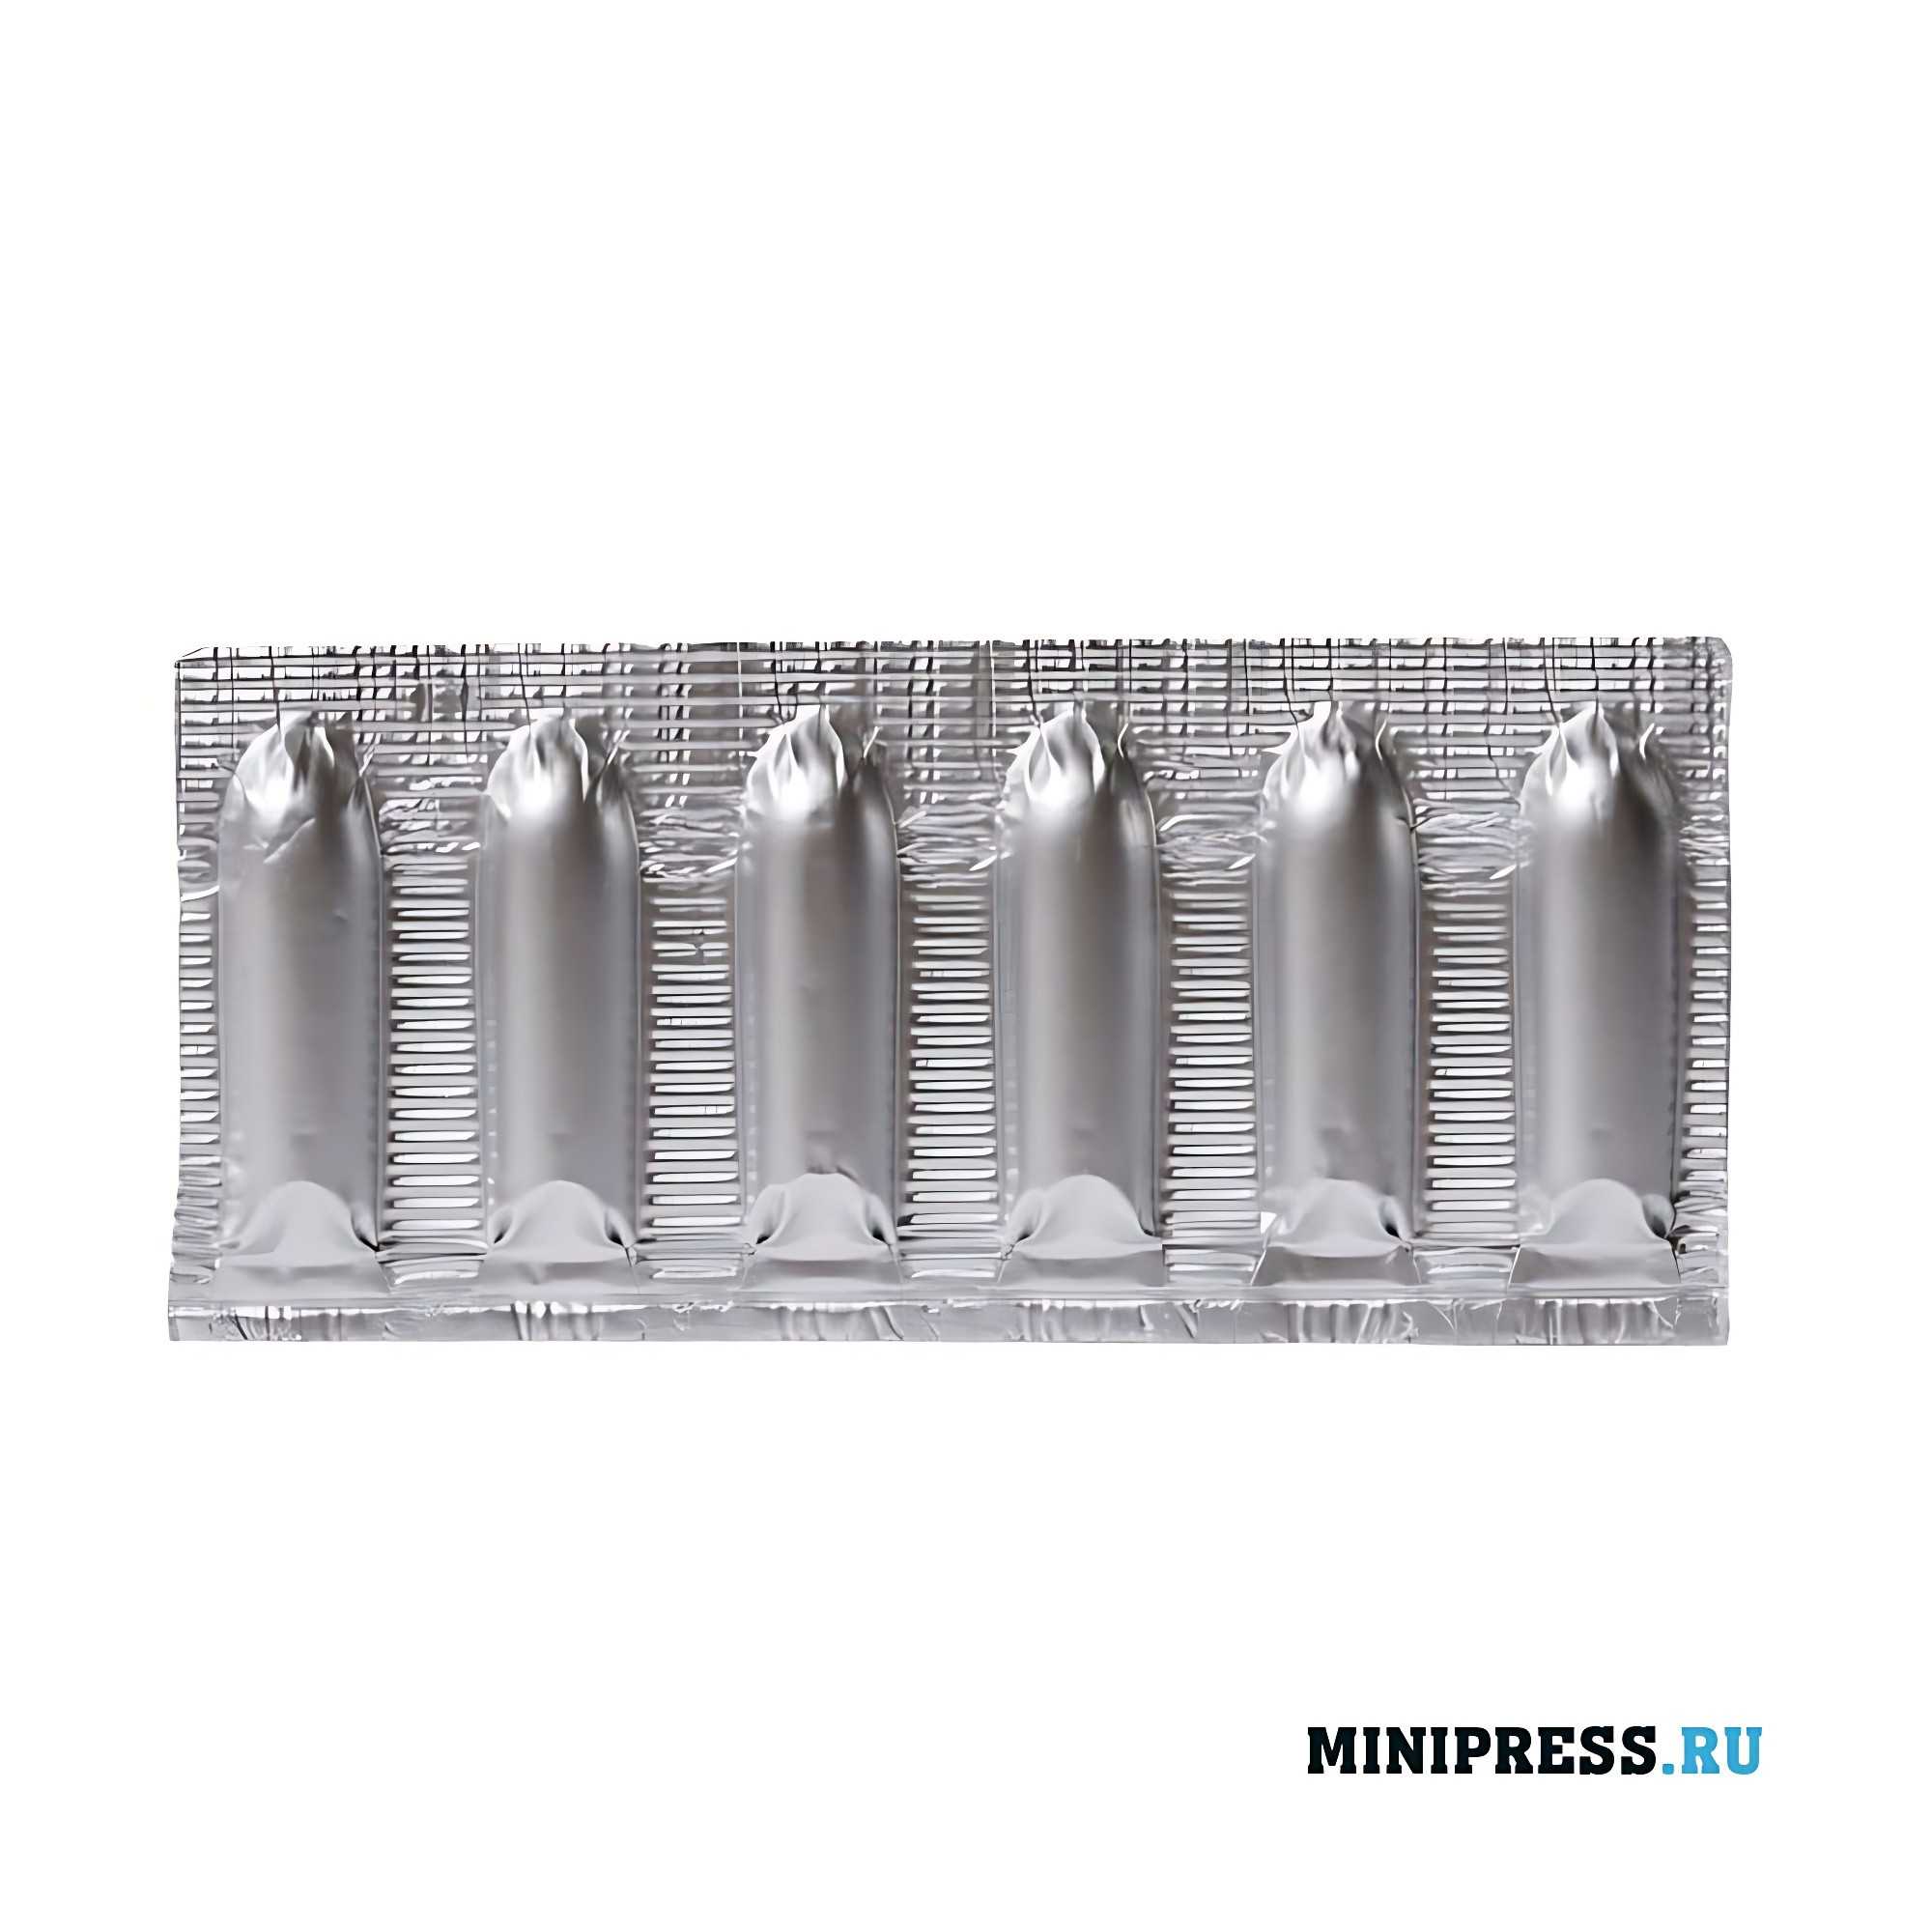 Types of suppositories